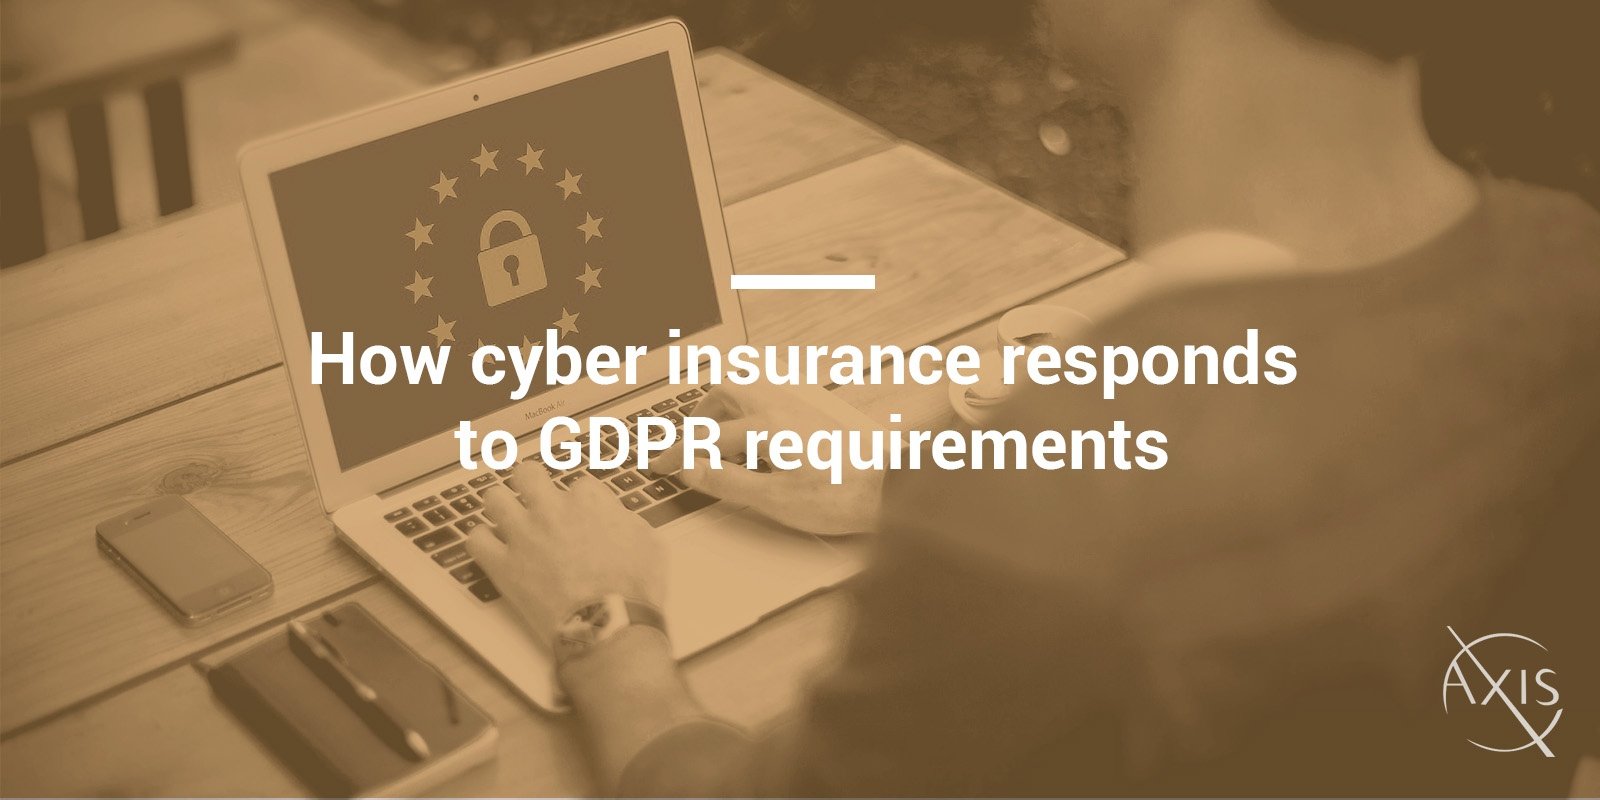 How cyber insurance responds to GDPR requirements